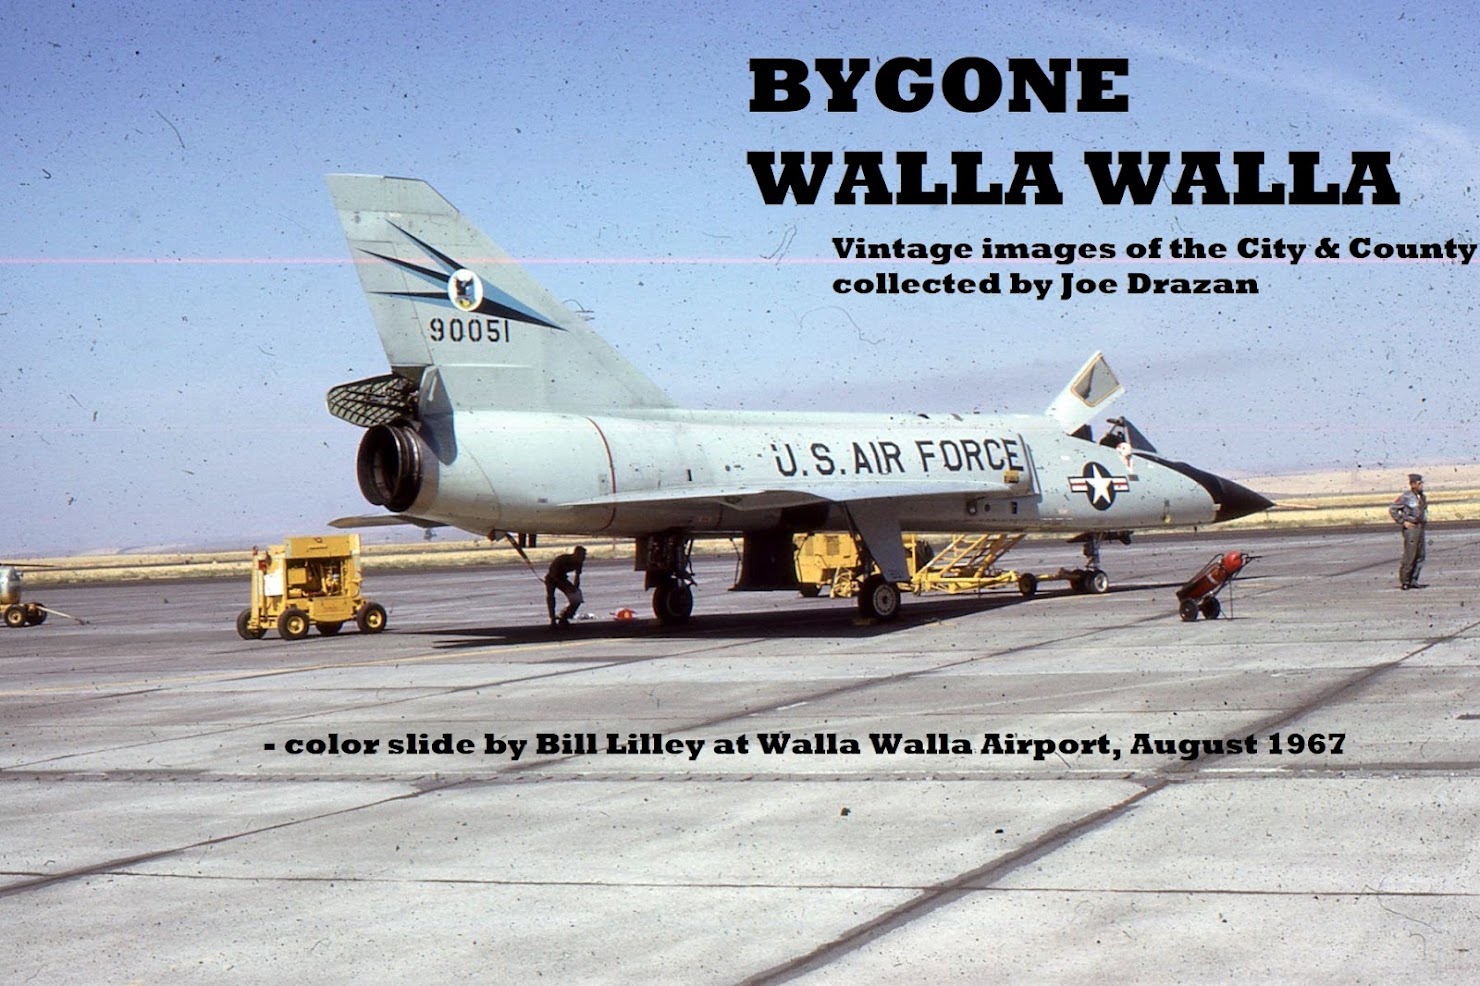 Bygone Walla Walla: vintage images of the City and County (and beyond), collected by Joe Drazan